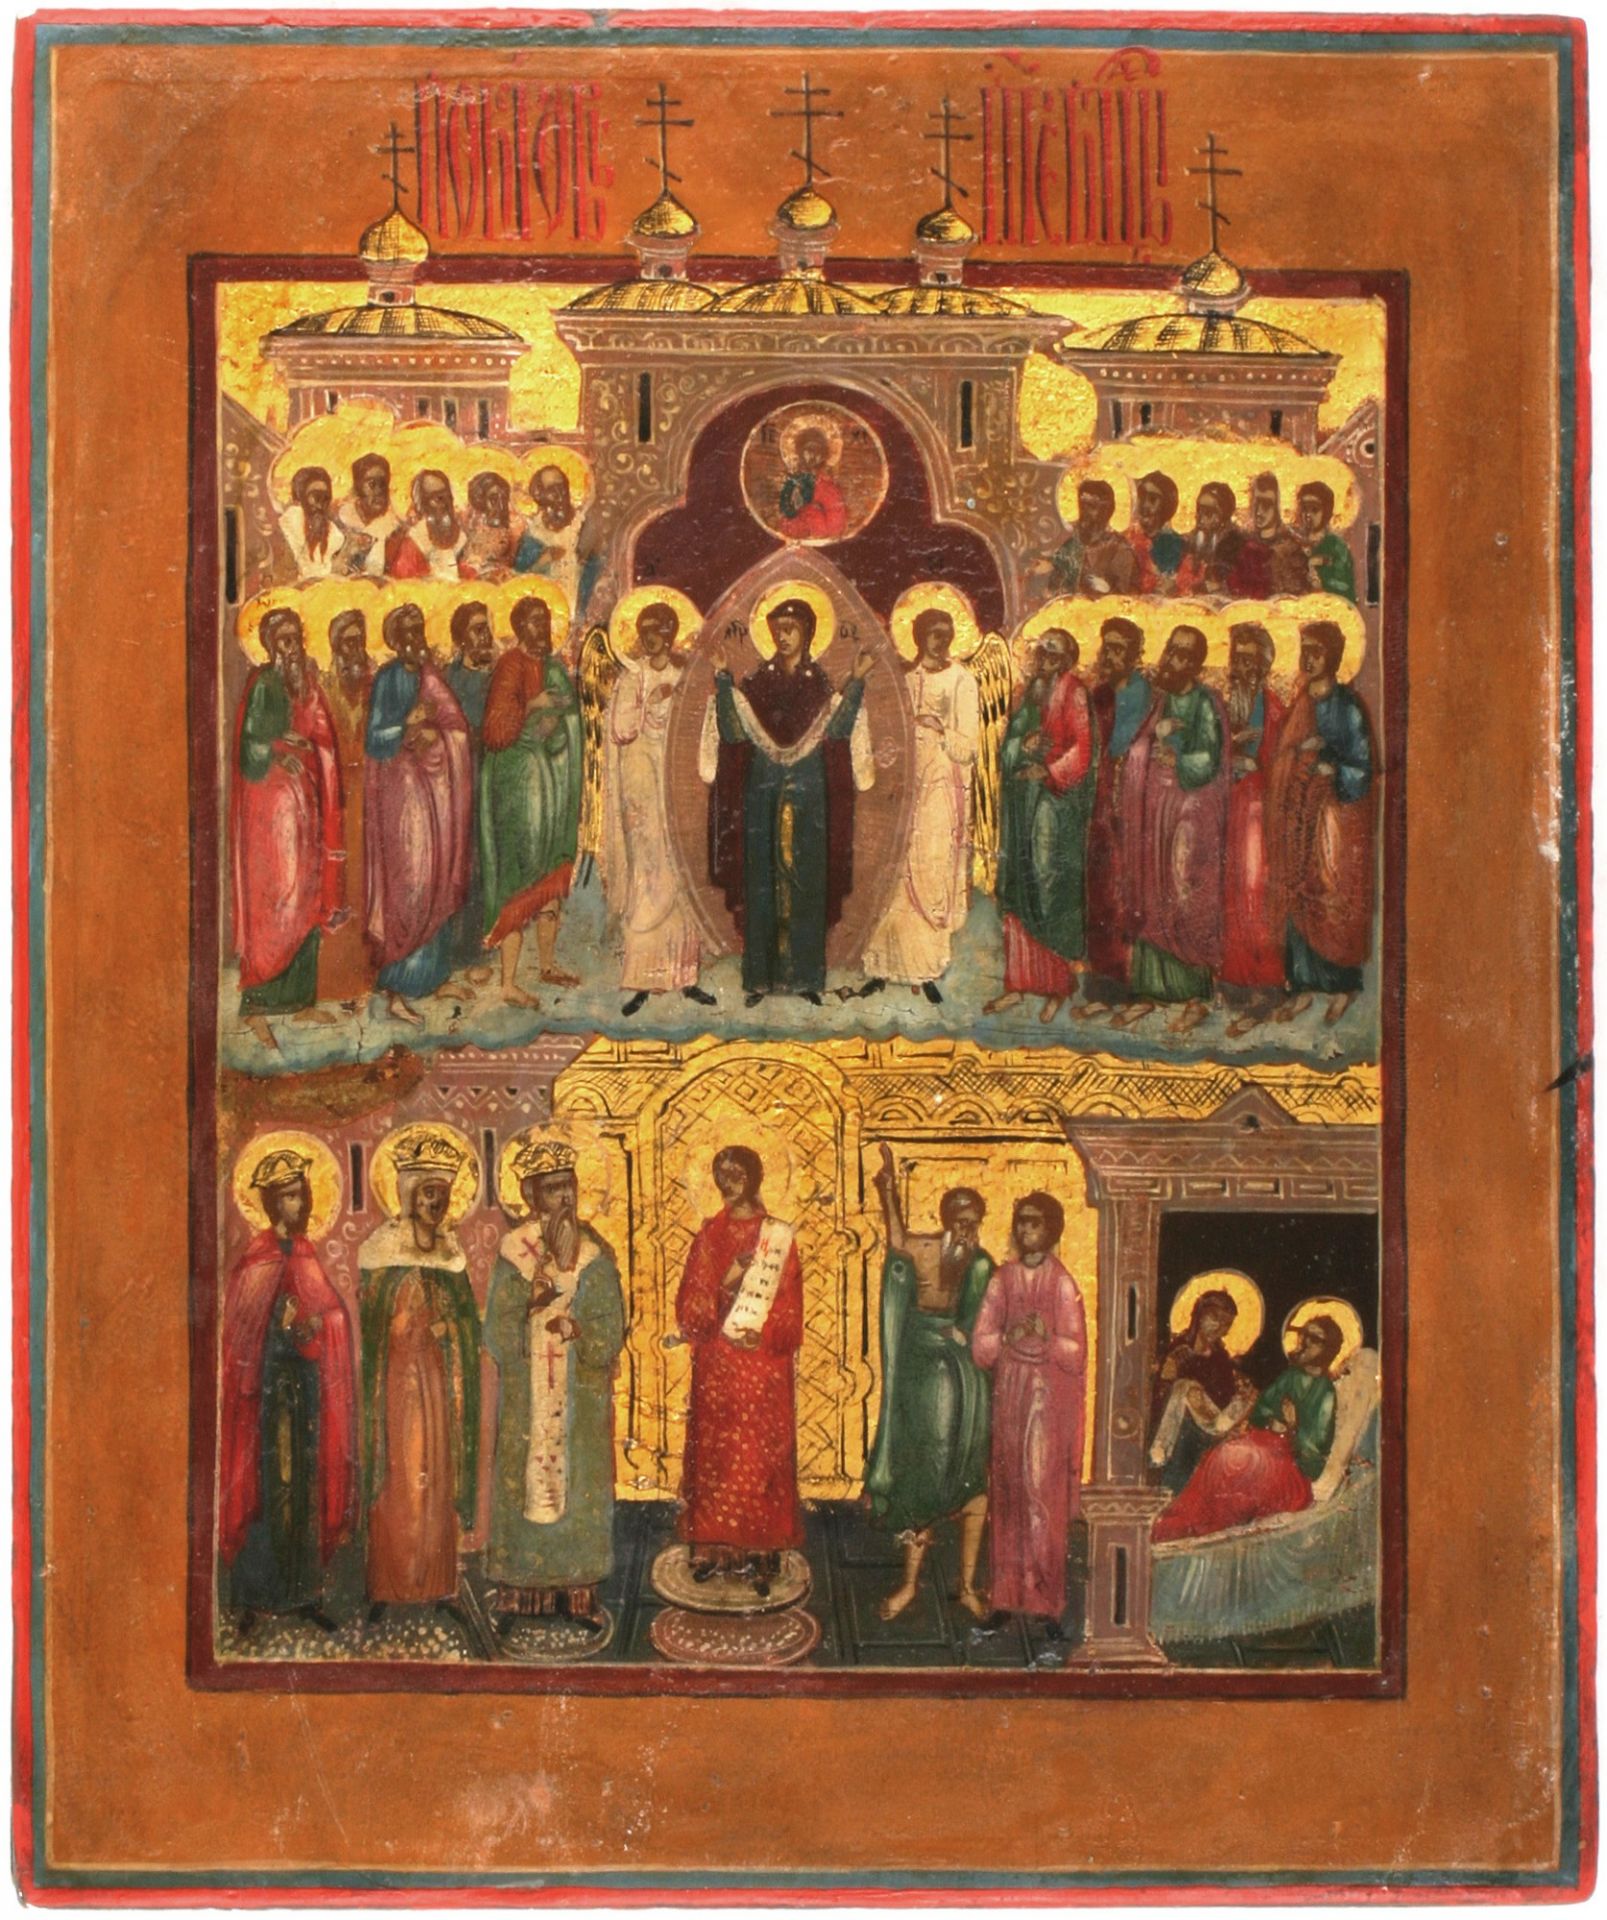 [Russian icon]. Intercession of the Virgin Mary. 18-19th century. 22x26 cm